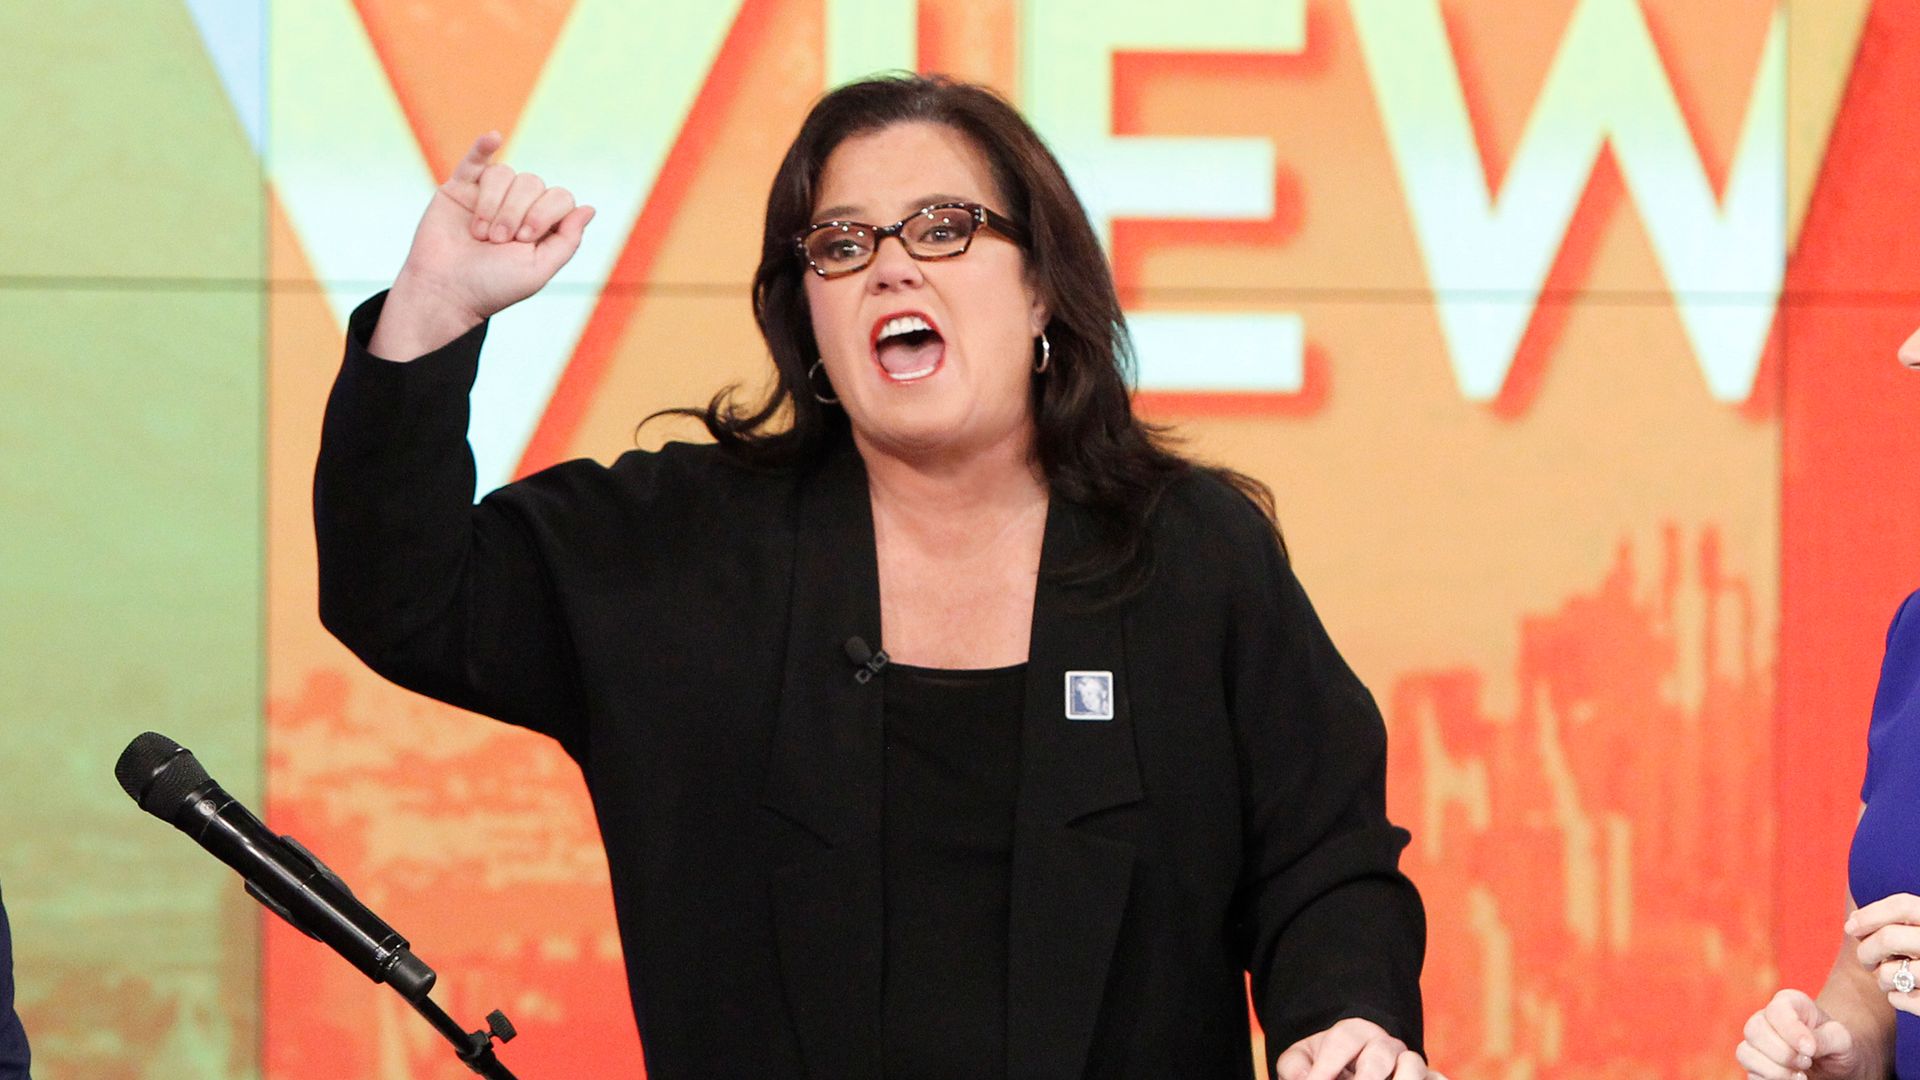 Rosie O Donnell on The View